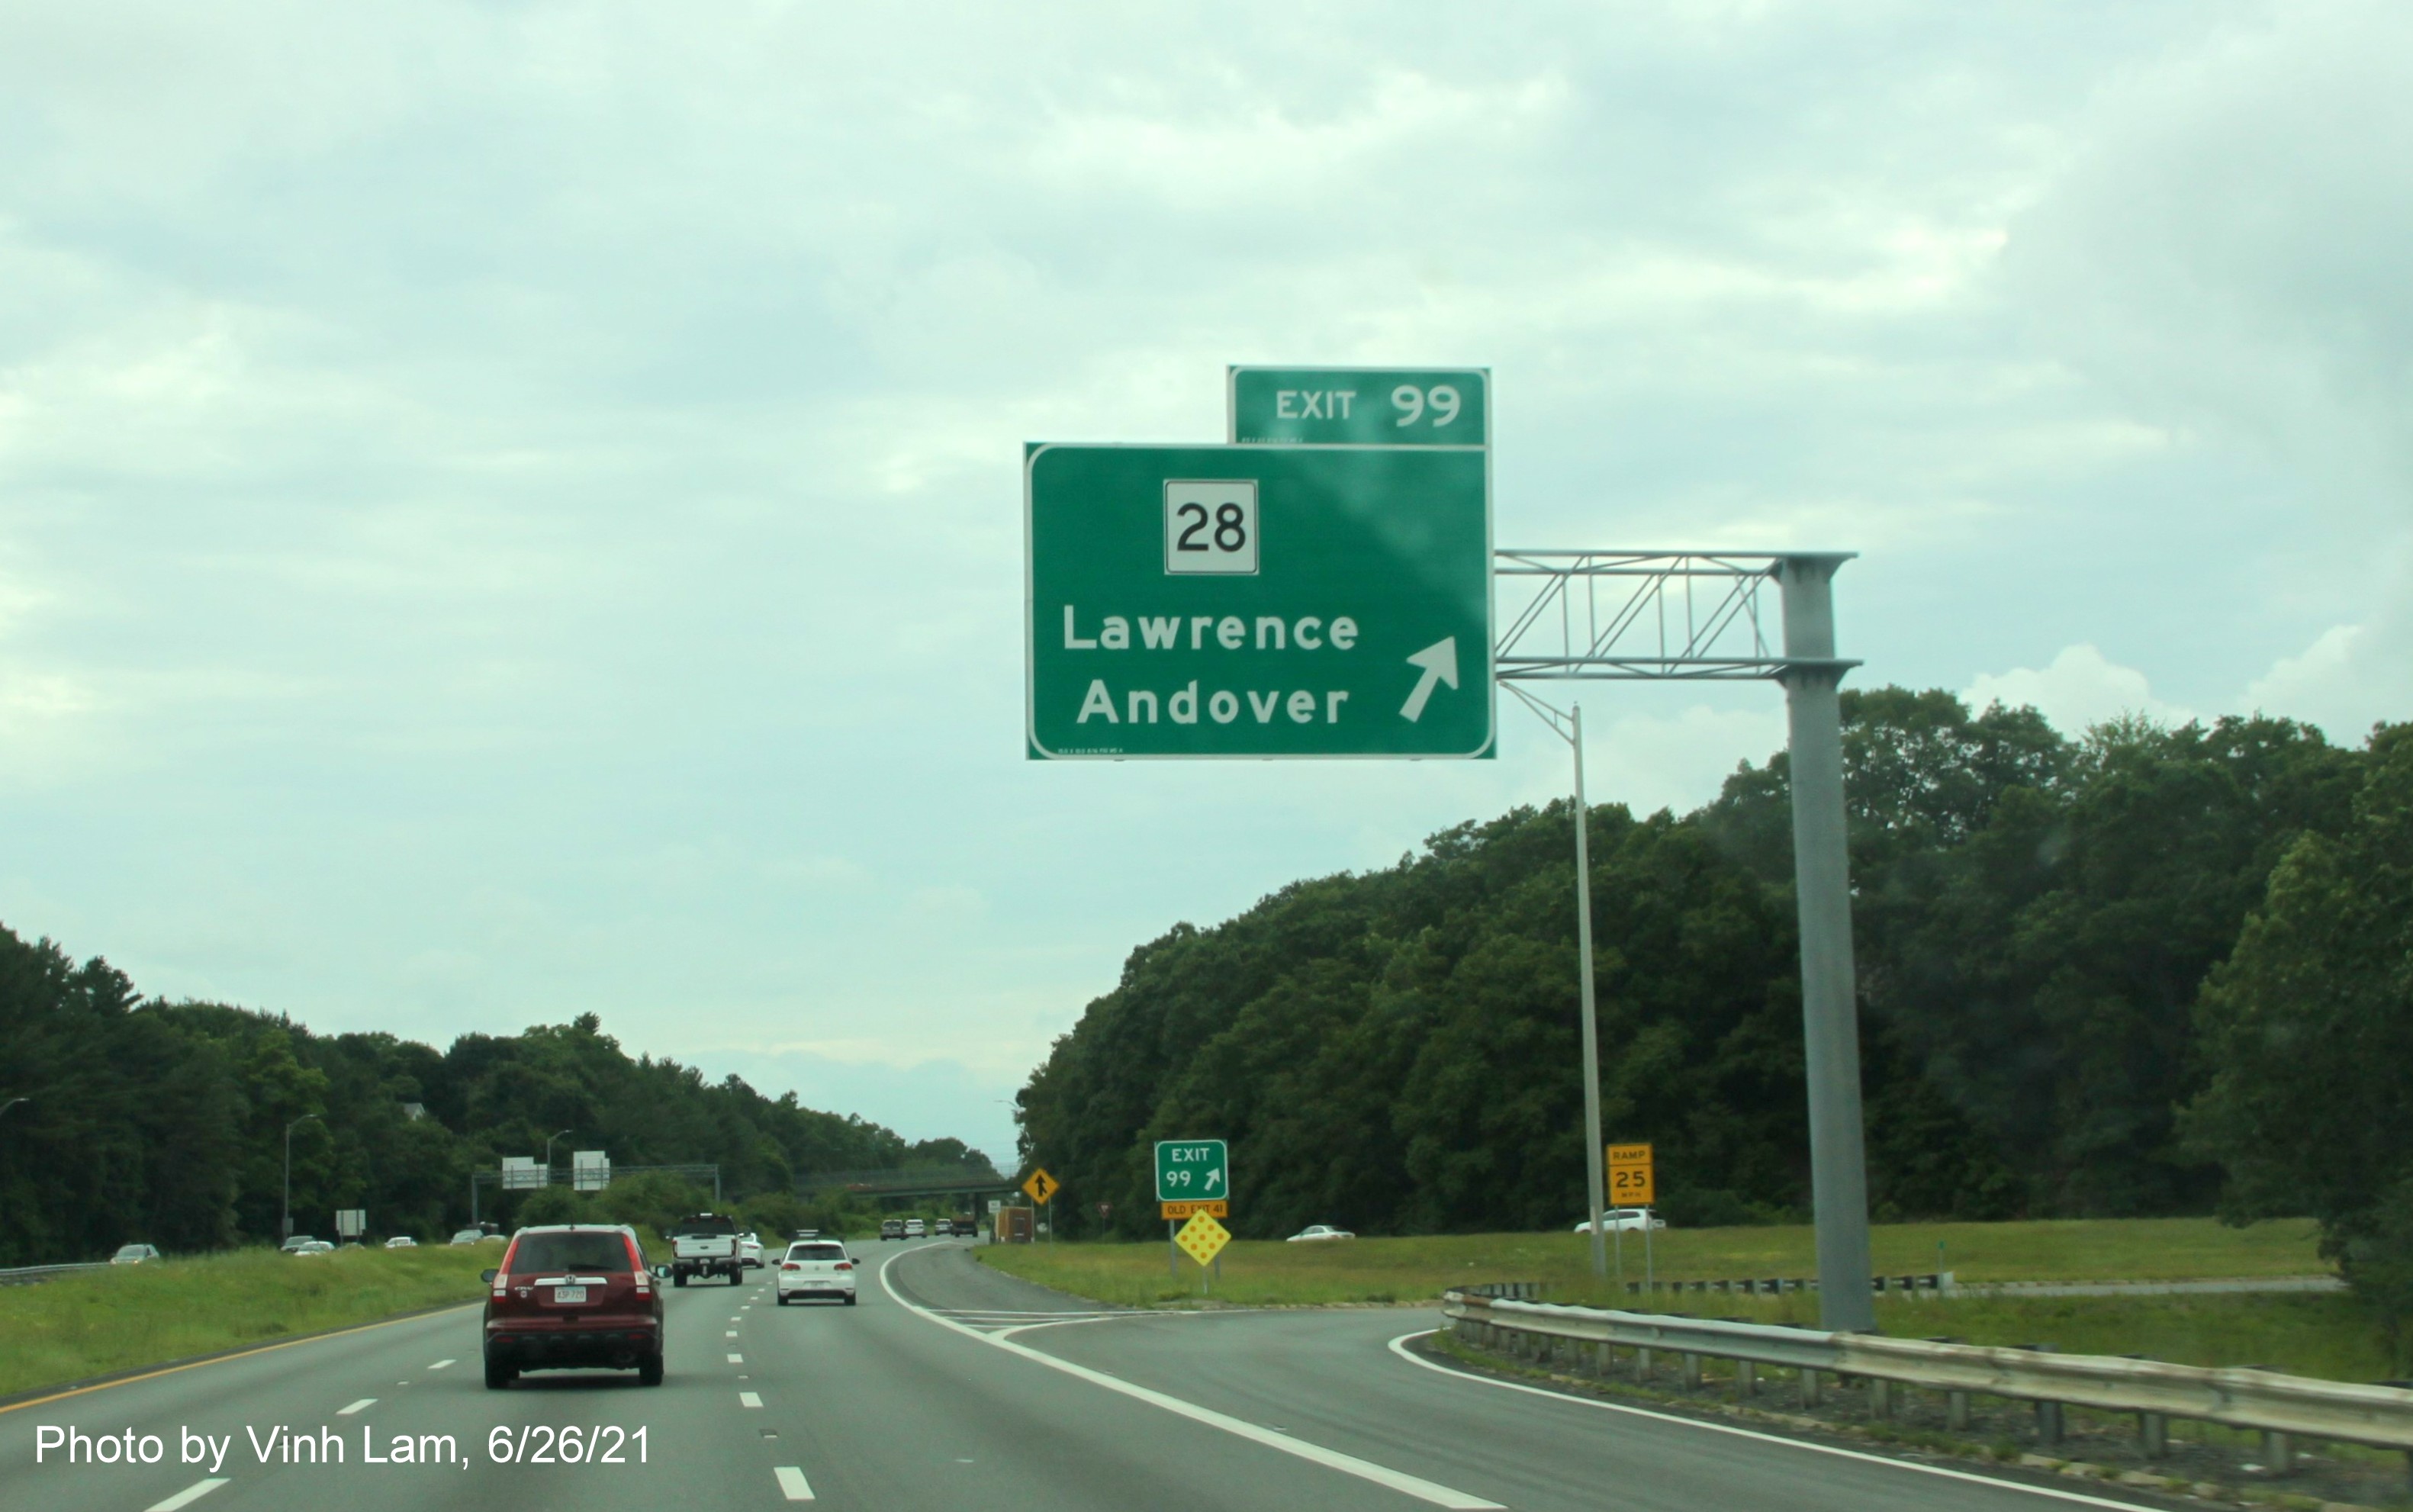 Image of overhead ramp sign for MA 28 exit with new milepost based exit number on I-495 South in Andover, by Vinh Lam, June 2021